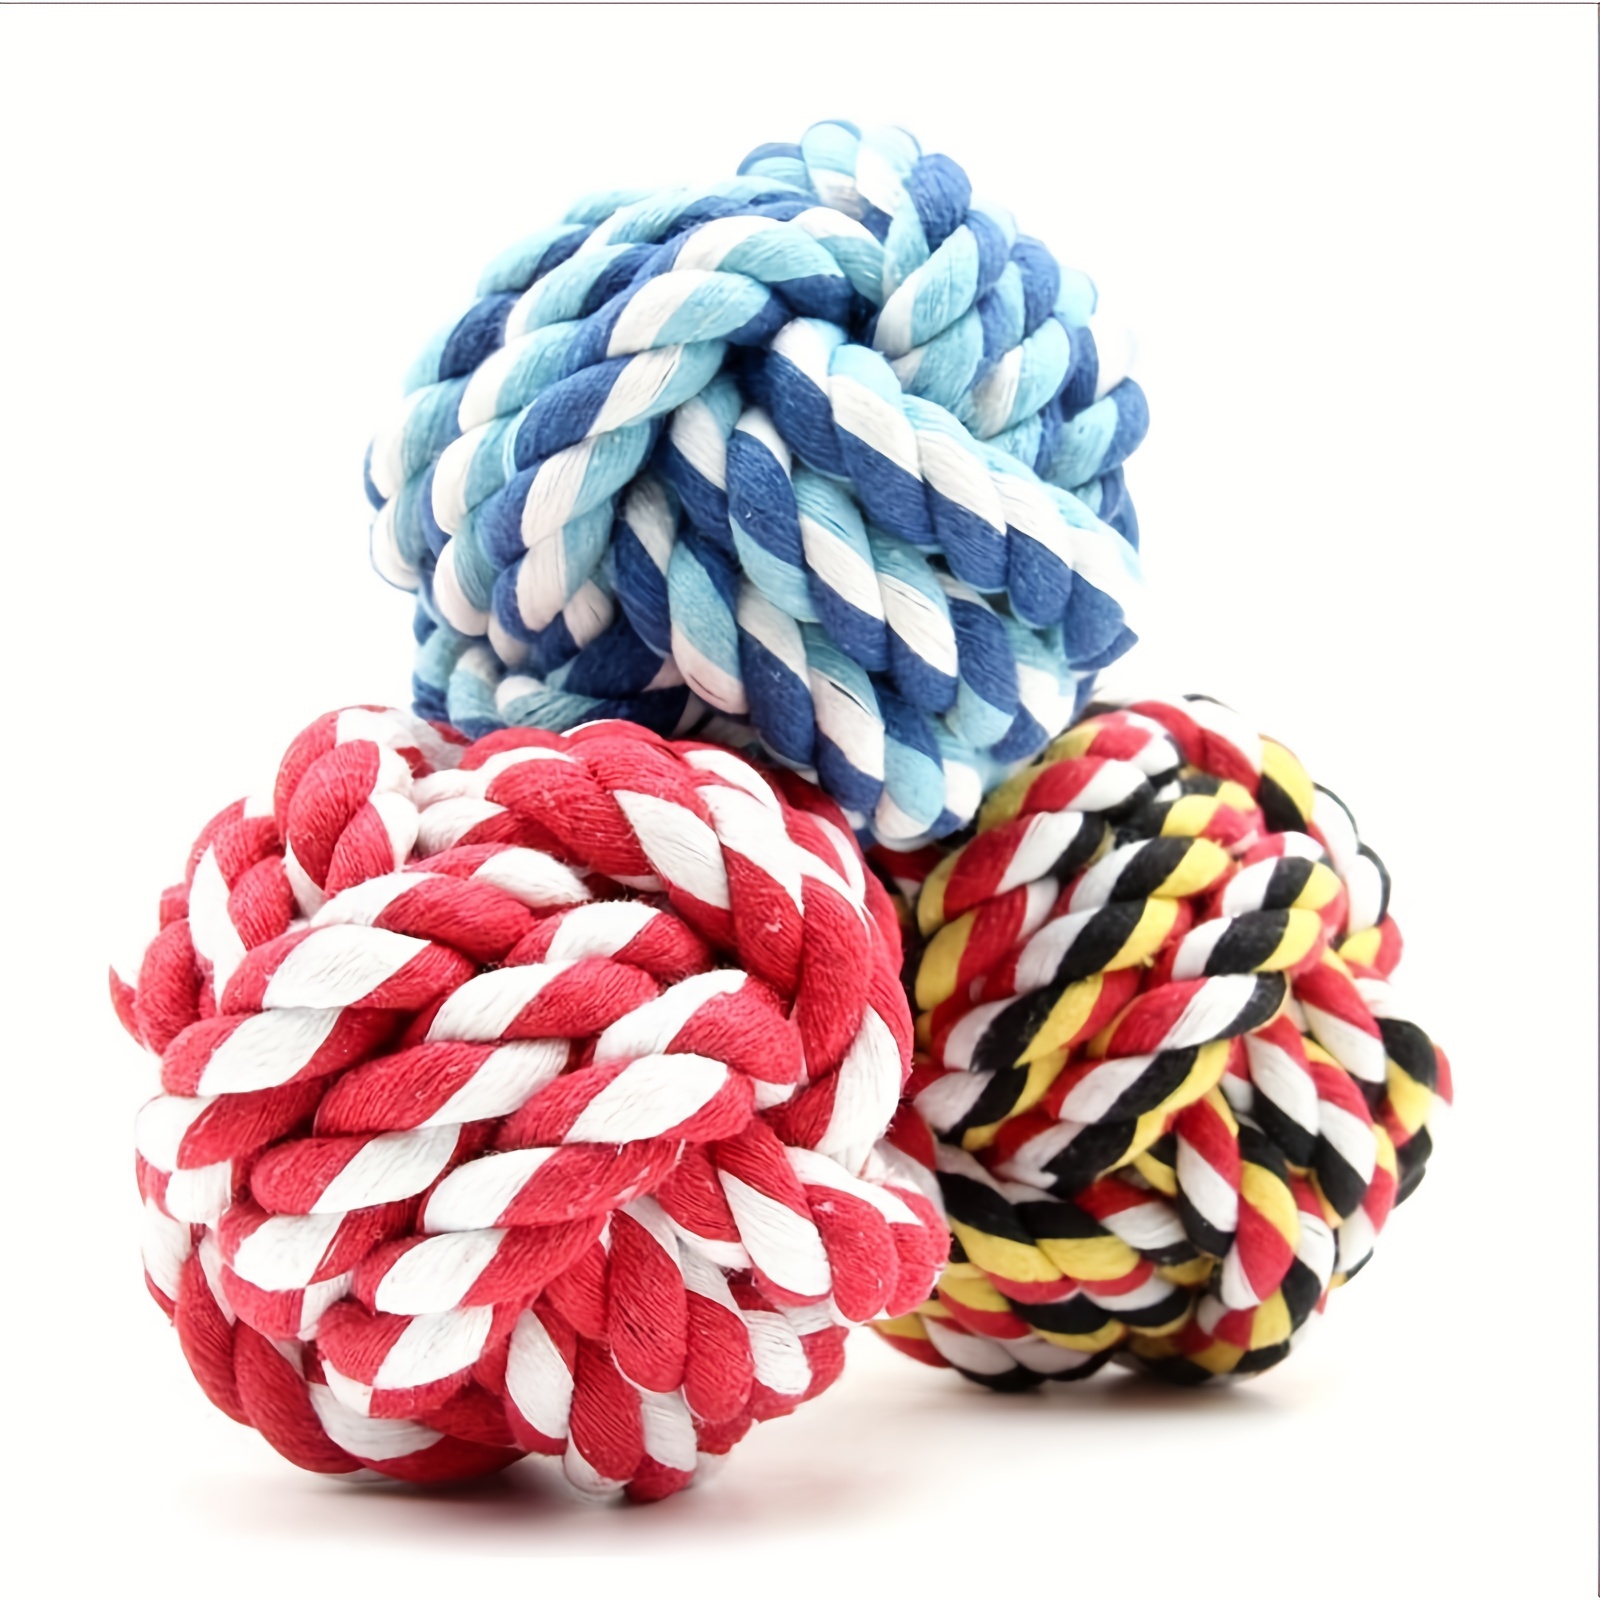 

Bite Resistant Pet Chew Toys For Small And Medium Dogs - Cleans Teeth And Promotes Play - Rope Knot Ball Toy For Puppies And Cats - Mascota Accessories